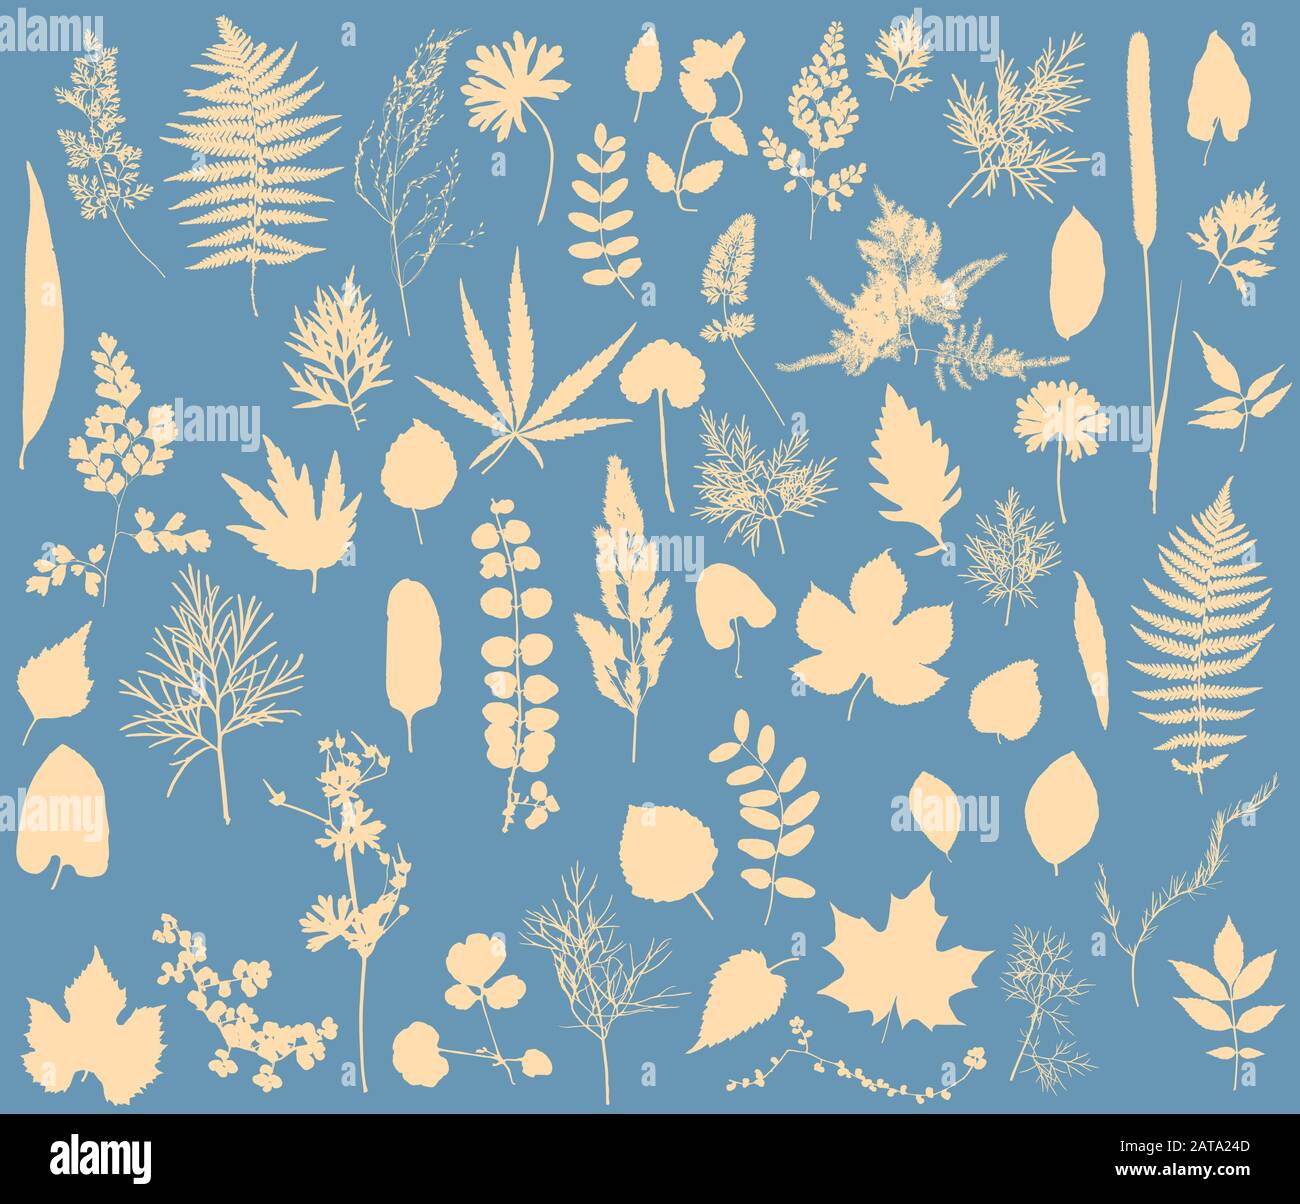 Herbarium - Vector Collection of Dried Leaves Silhouettes Stock Vector